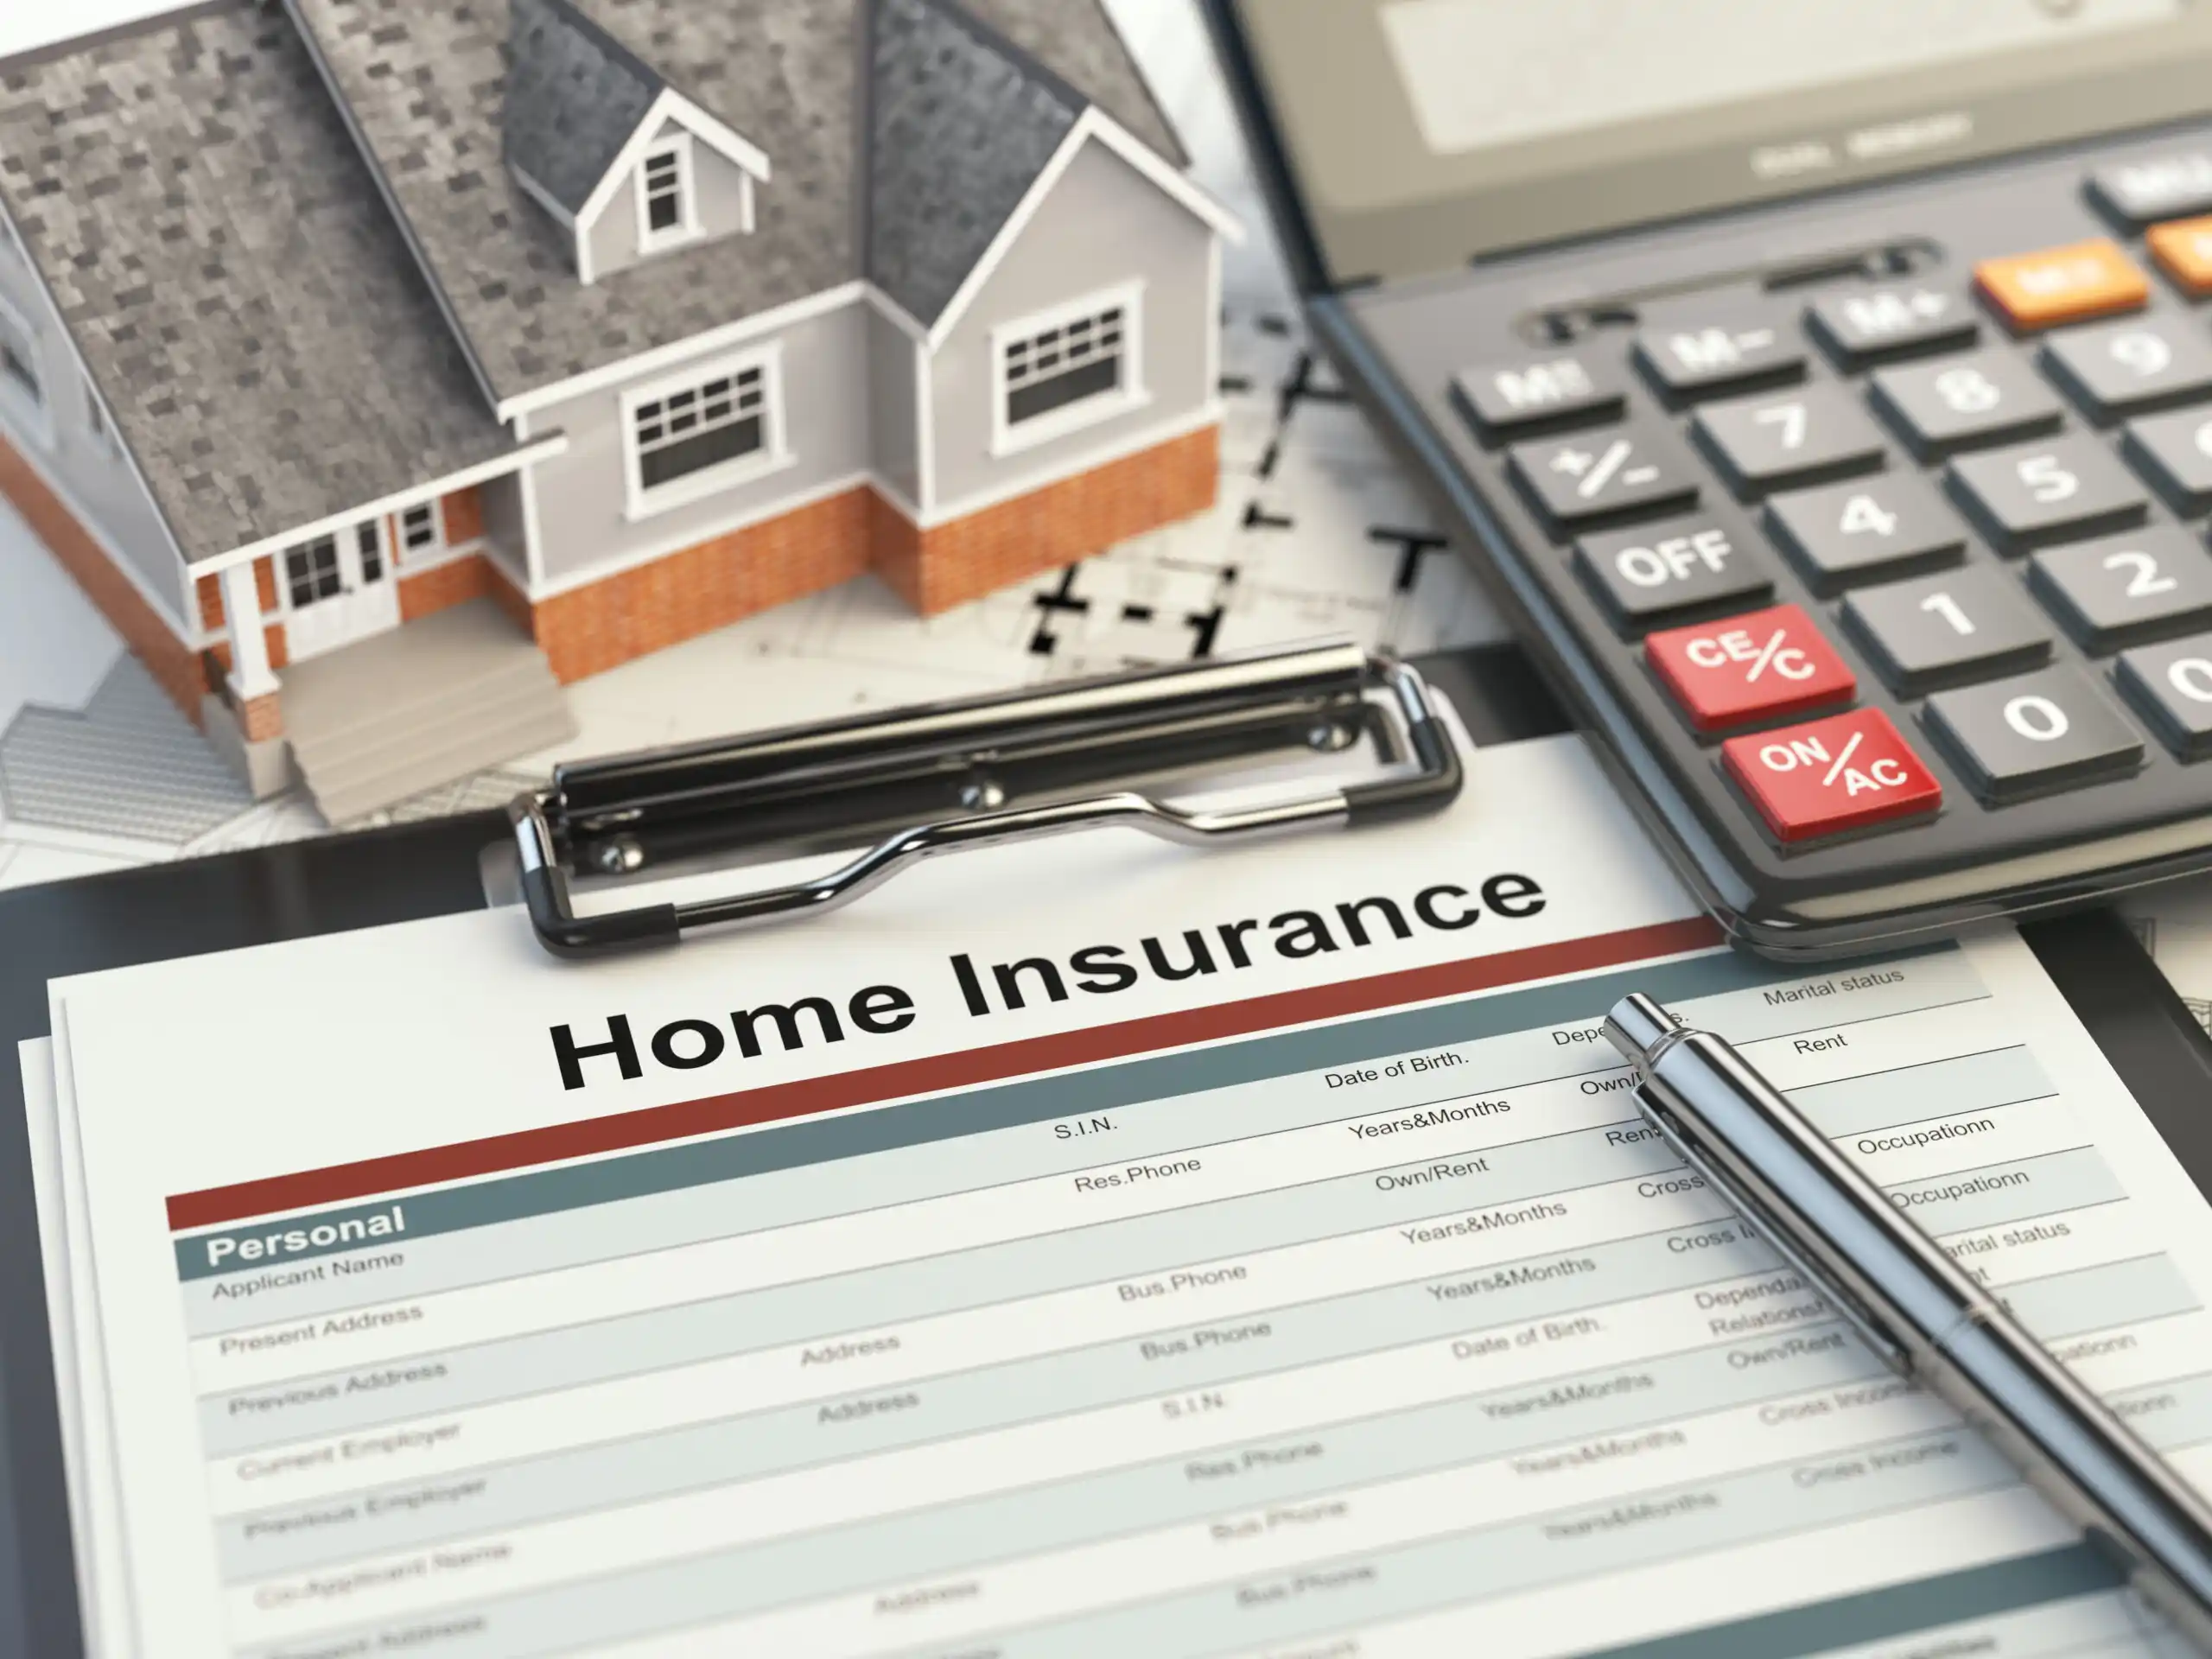 Is Homeowner’s Insurance Tax Deductible?